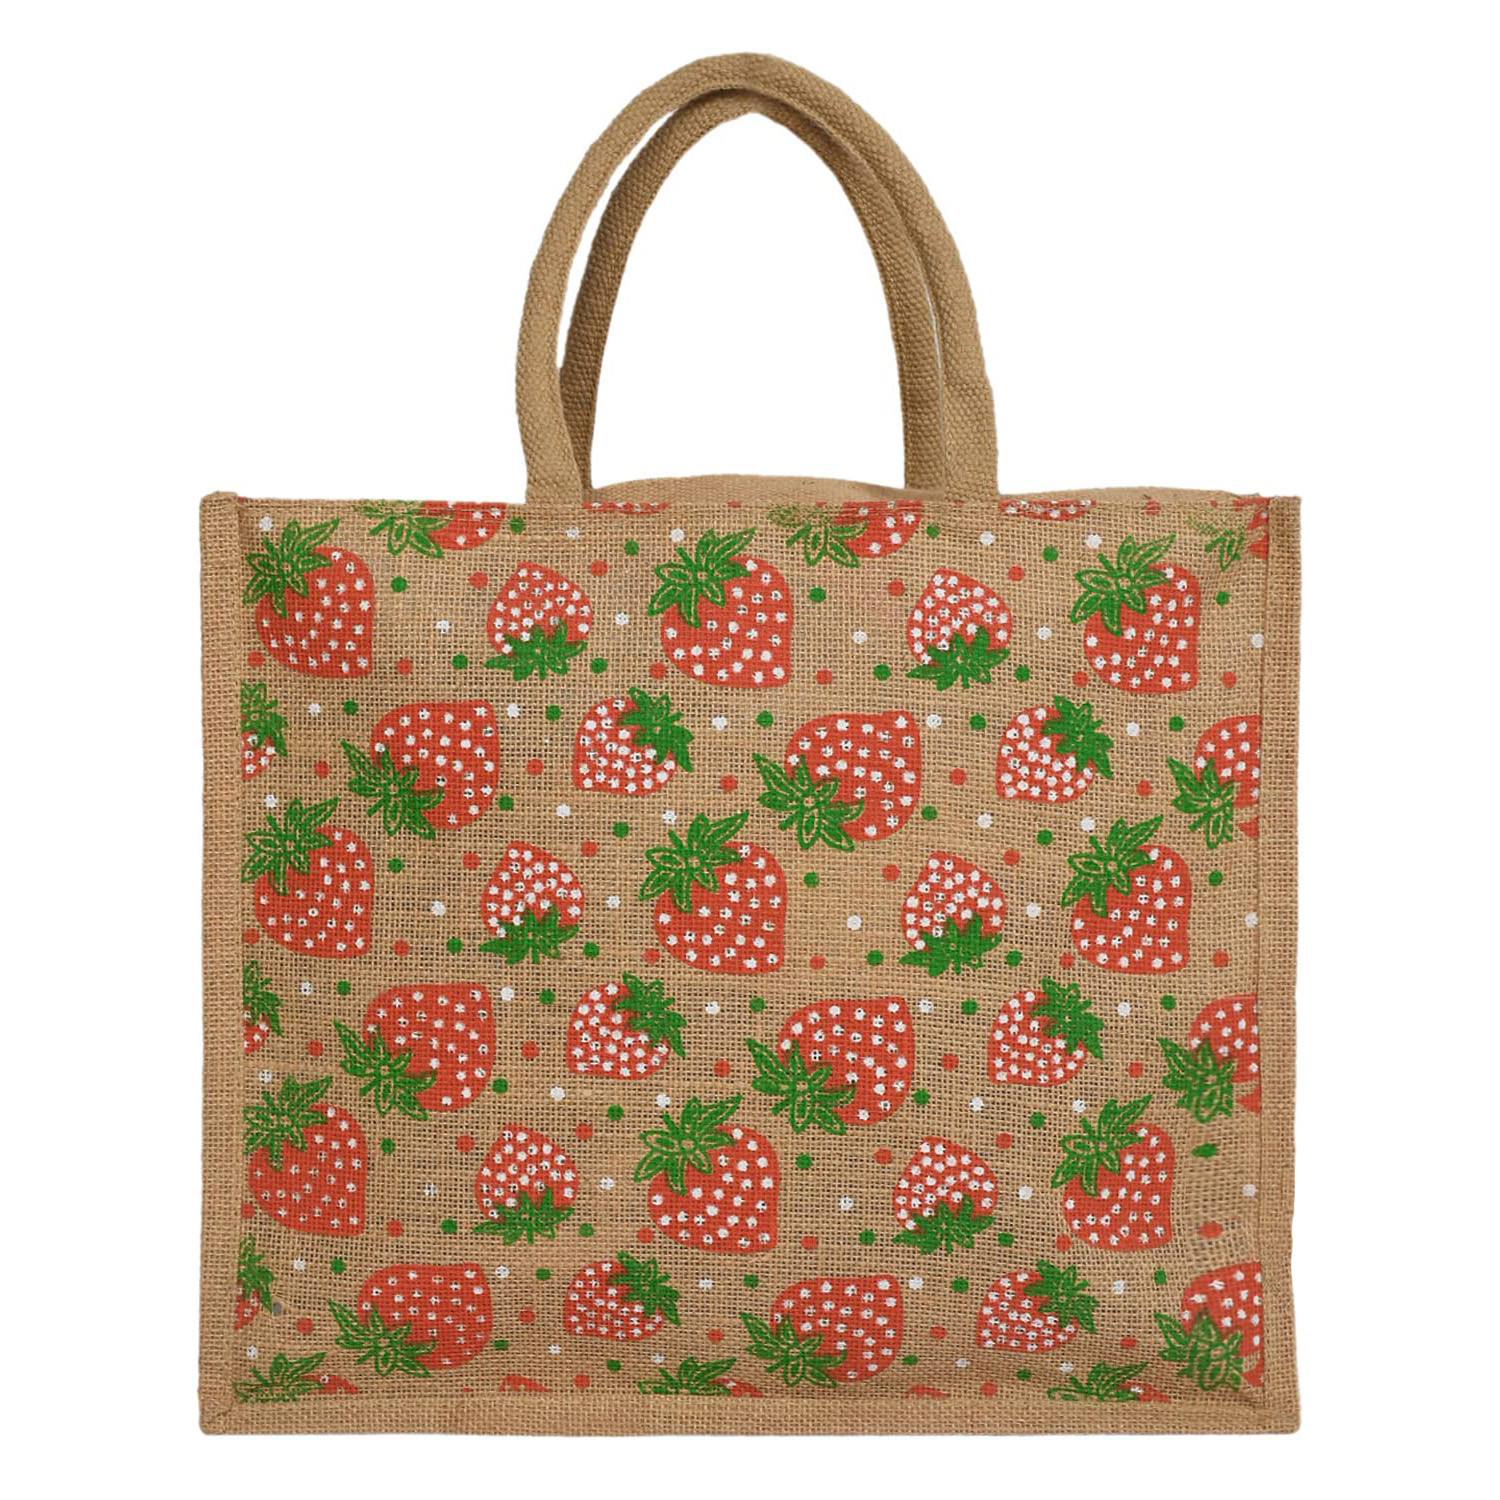 Kuber Industries Shopping Bag|Jute Eco-Friendly & Reusable Grocery Bag|Hand Bag Strawberry Print With Zip & Handle for Daily Use|16x15 Inch (Brown)